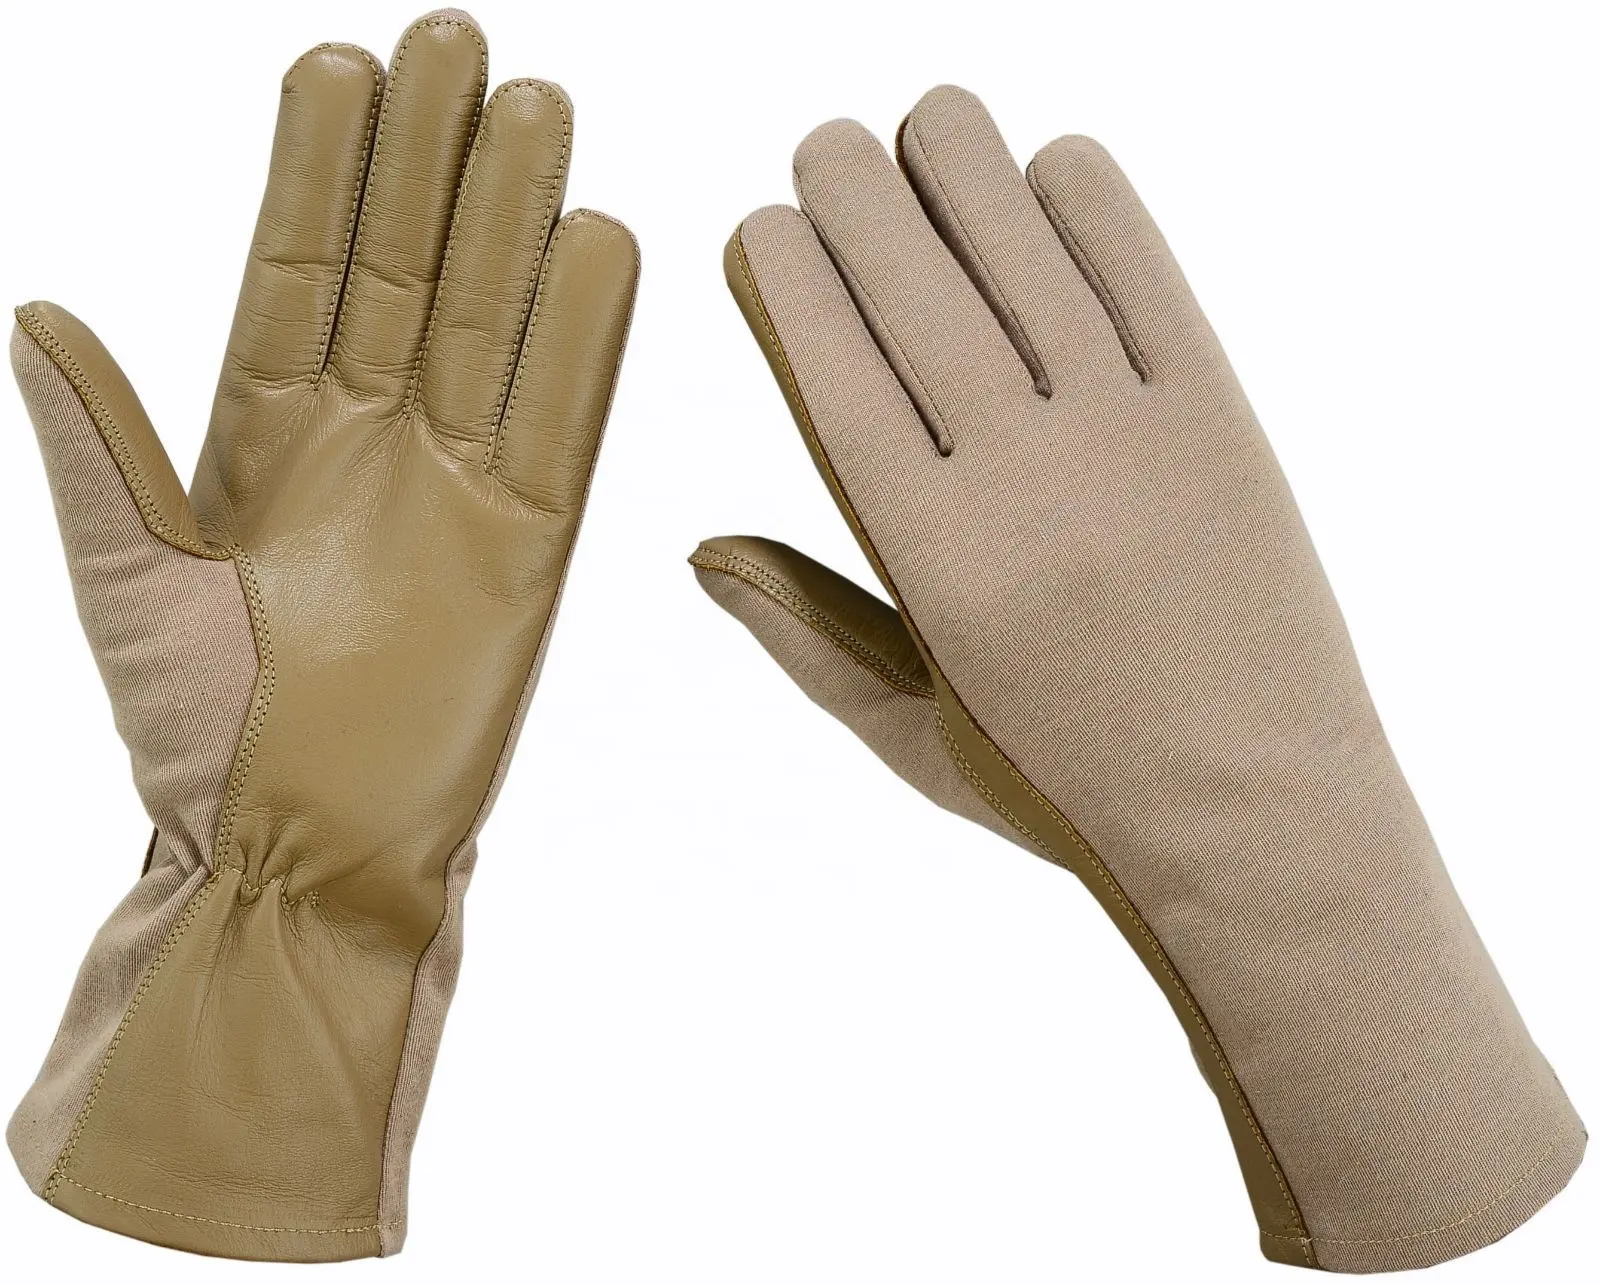 Military Style Nomex & MultiCam Pilot Flight Leather Gloves